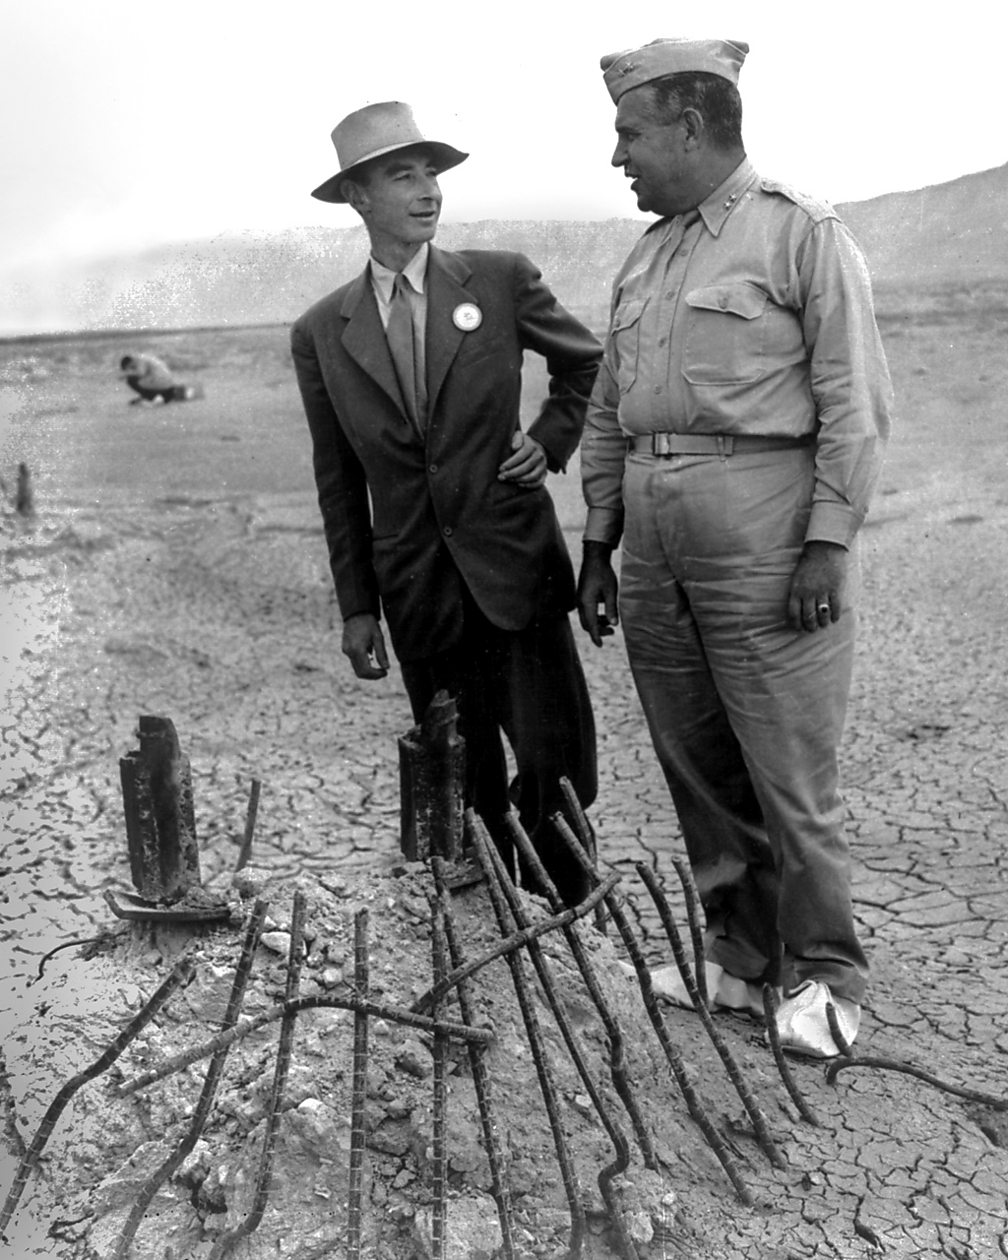 Alamy Robert Oppenheimer and General Leslie Groves examine the remains of the steel tower at the Trinity test site (Credit: Alamy)